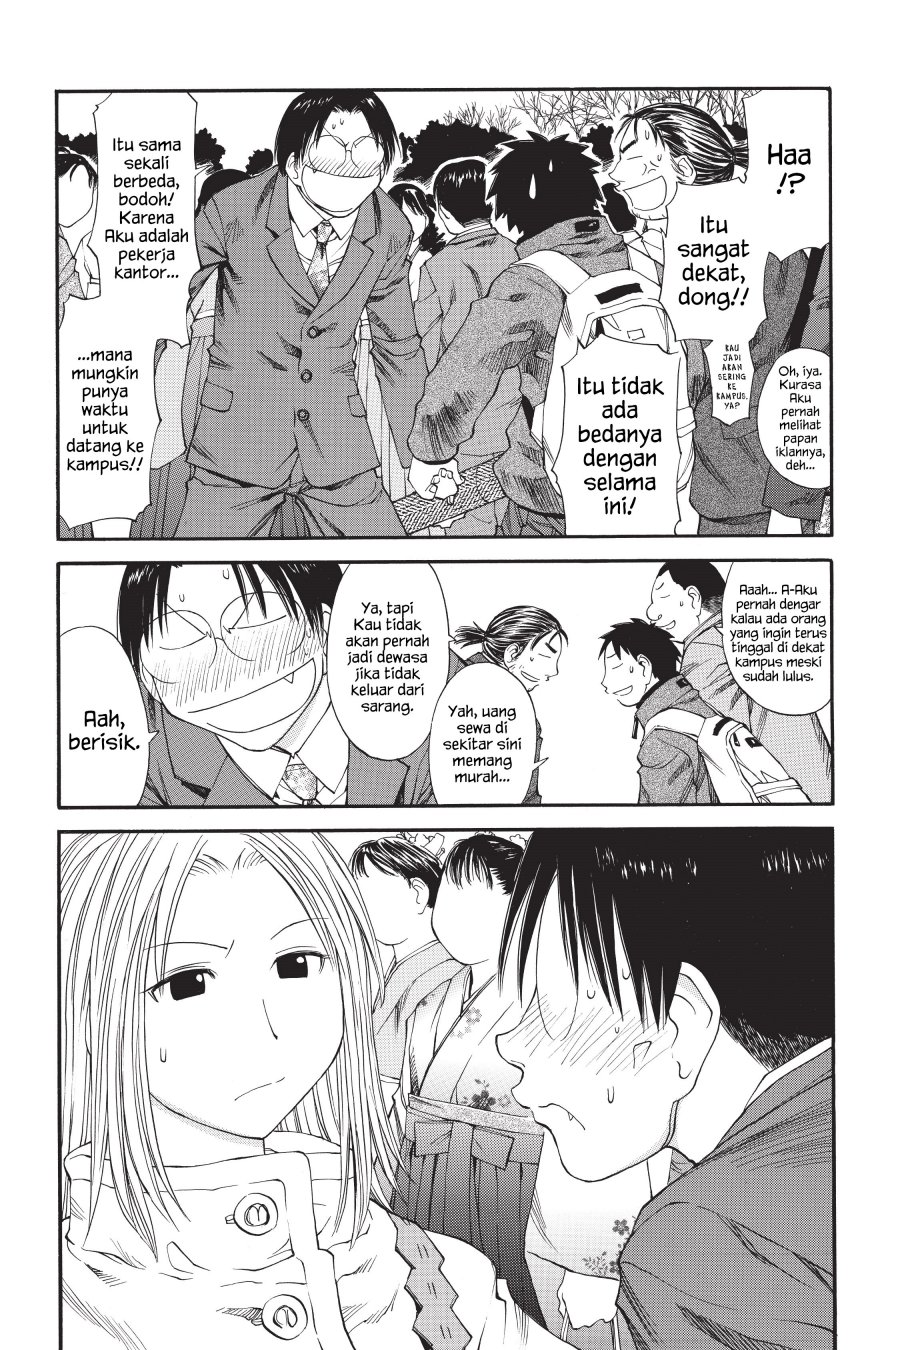 Genshiken – The Society for the Study of Modern Visual Culture Chapter 36 Image 22